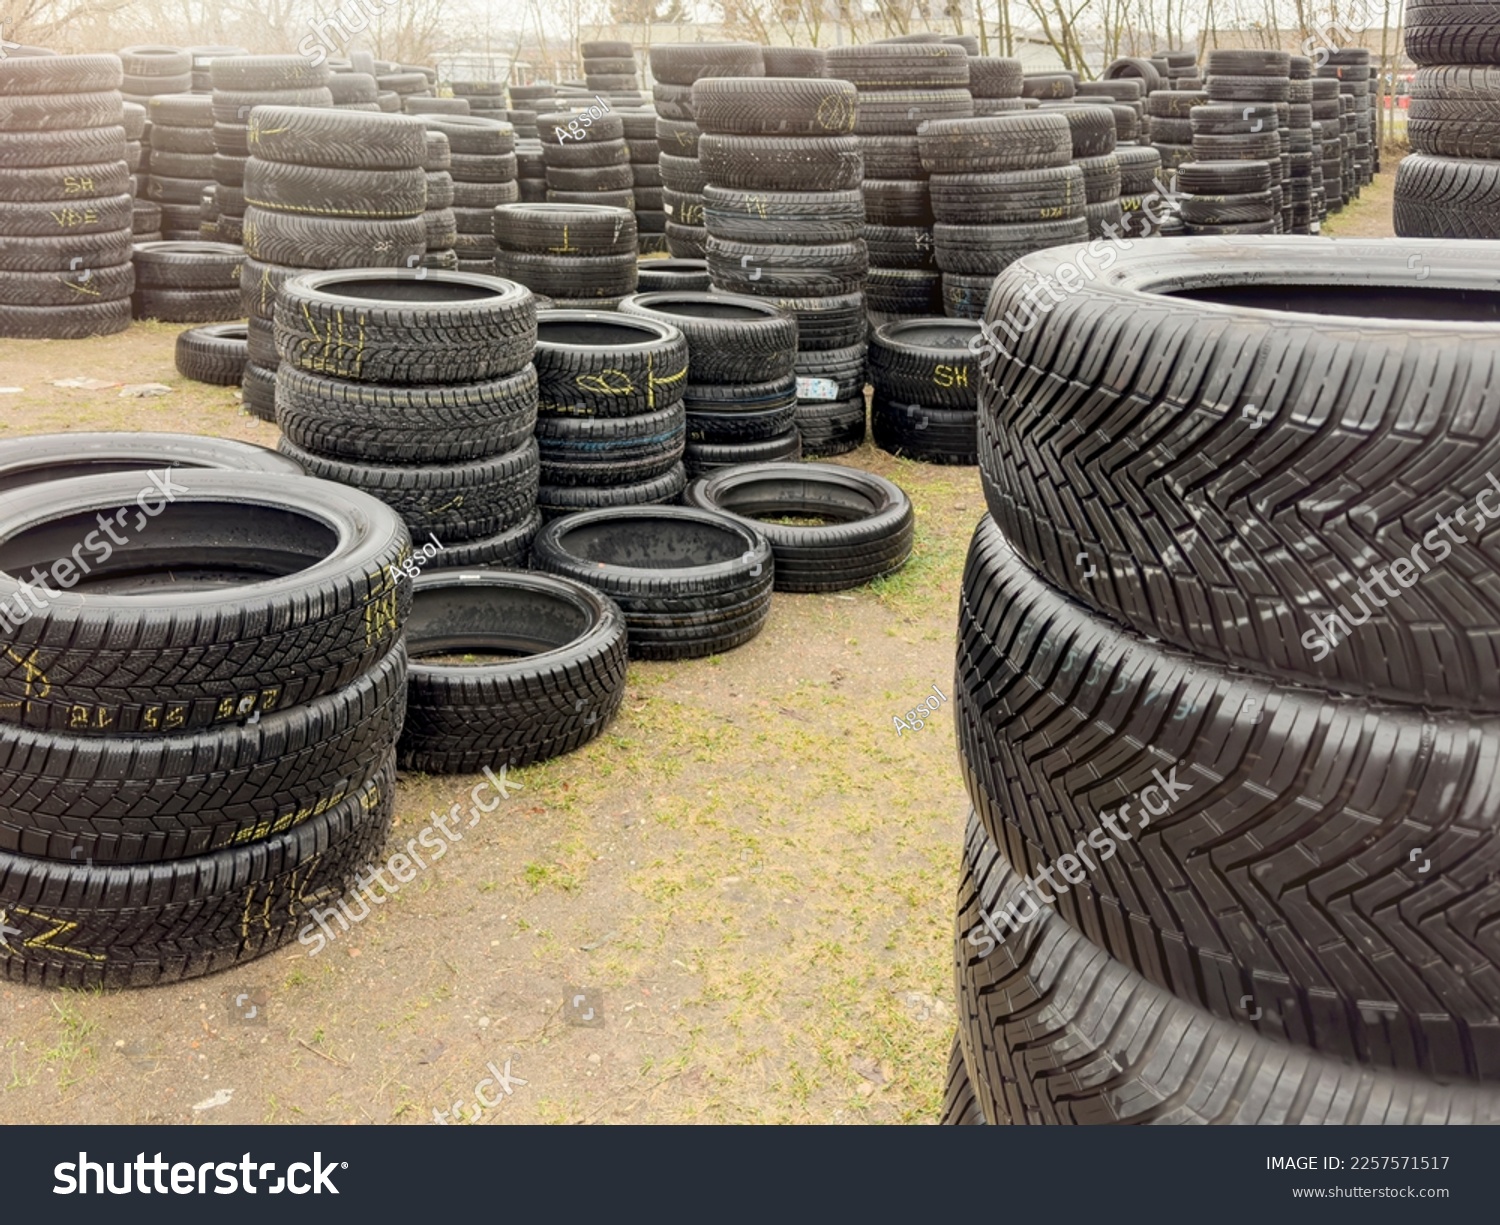 Used tires. Sale of used tires, stacks of different car tires lie on the ground. Buying used tires is a cheap alternative to new. #2257571517